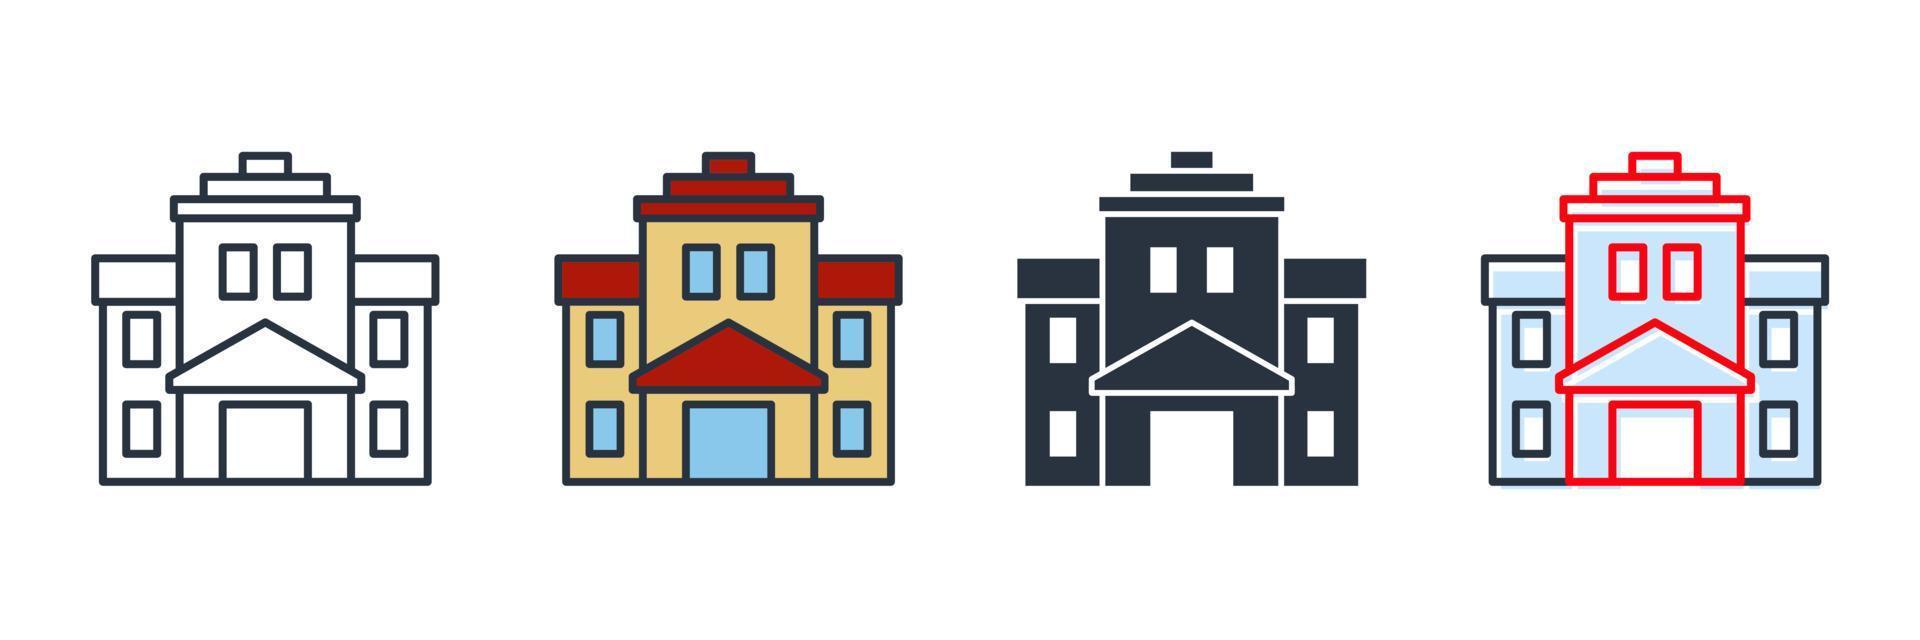 school building icon logo vector illustration. High school symbol template for graphic and web design collection